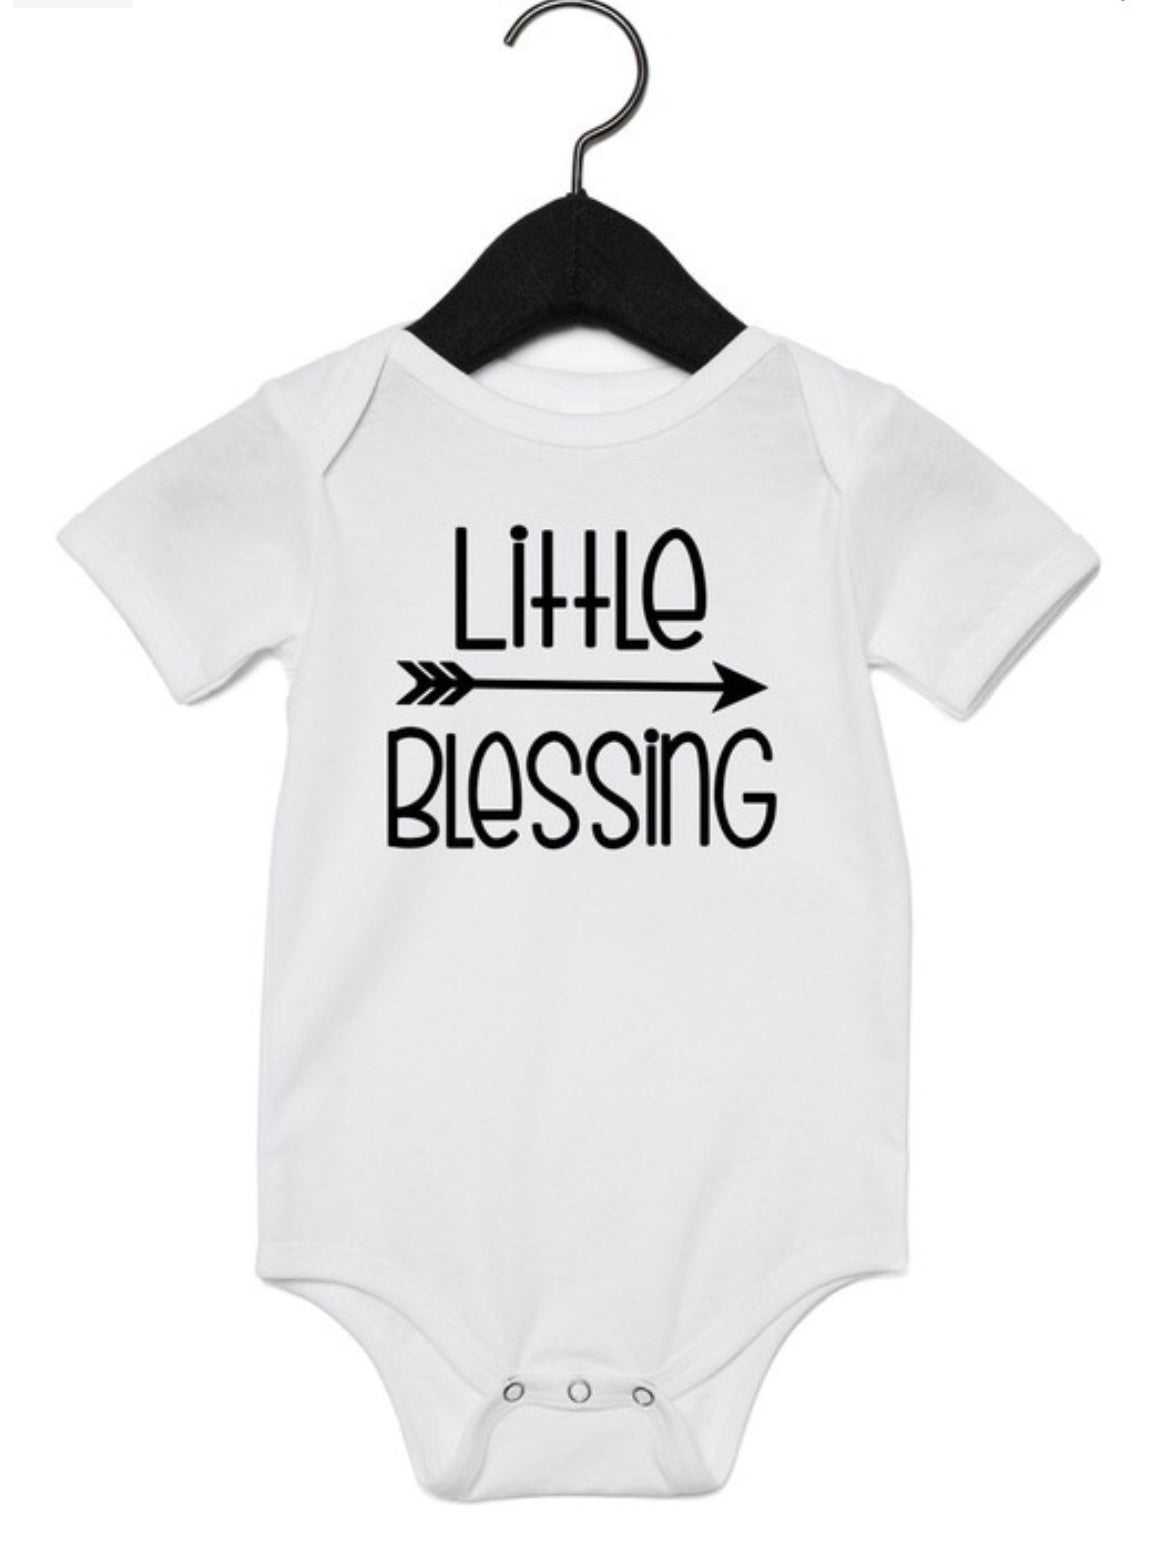 Little Blessing Baby Bodysuit (2 colors available)